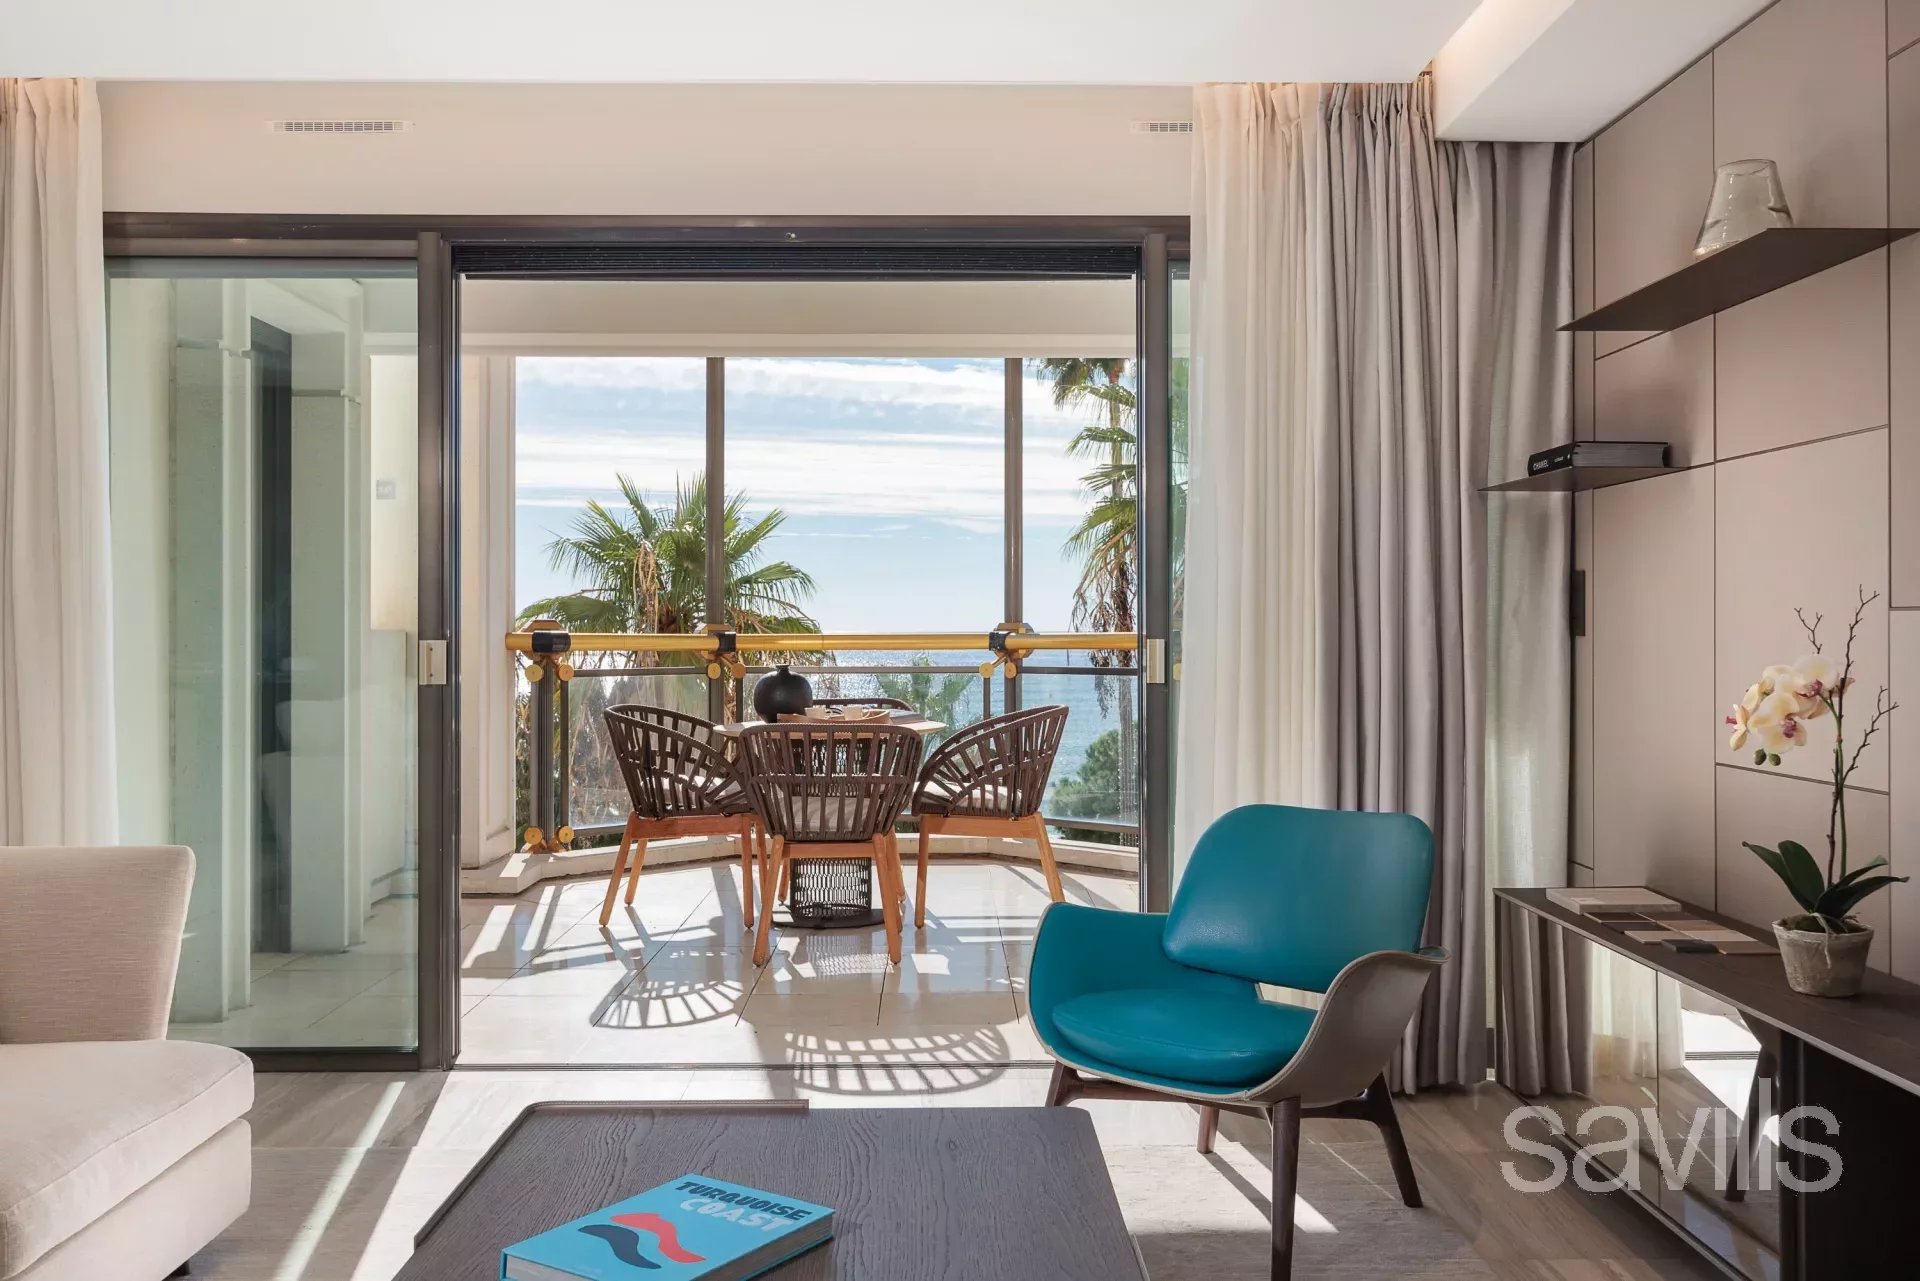 Beautifully presented two-bedroom apartment on the famous Croisette of Cannes.